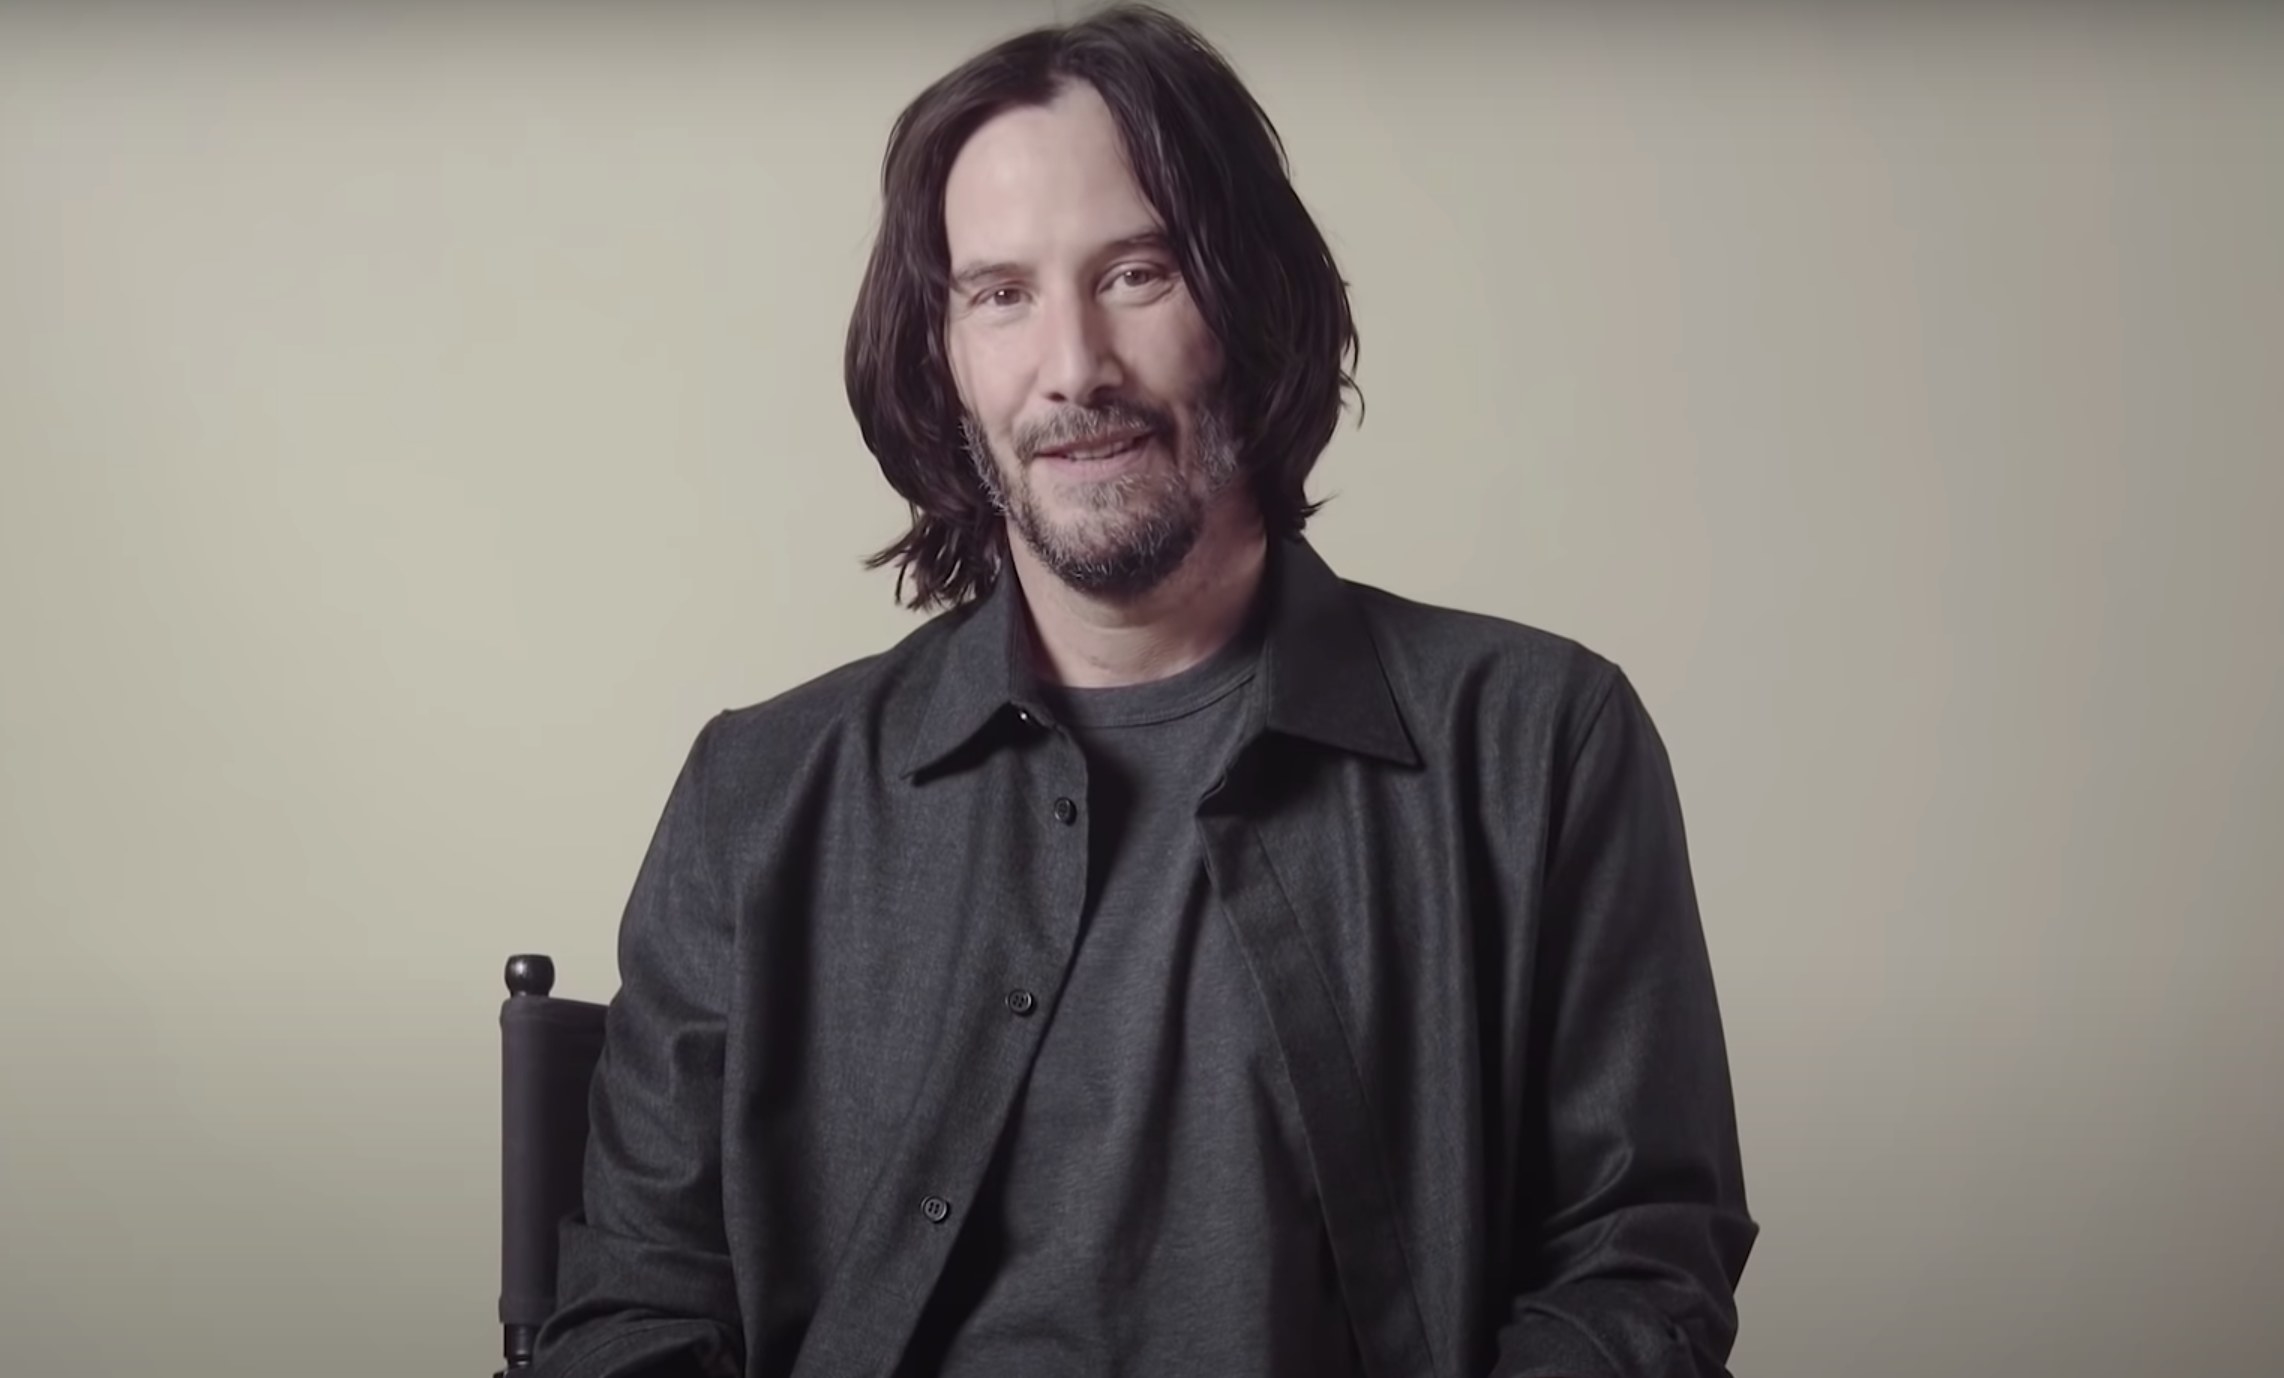 Keanu sits in a chair for the interview in front of a plain backdrop